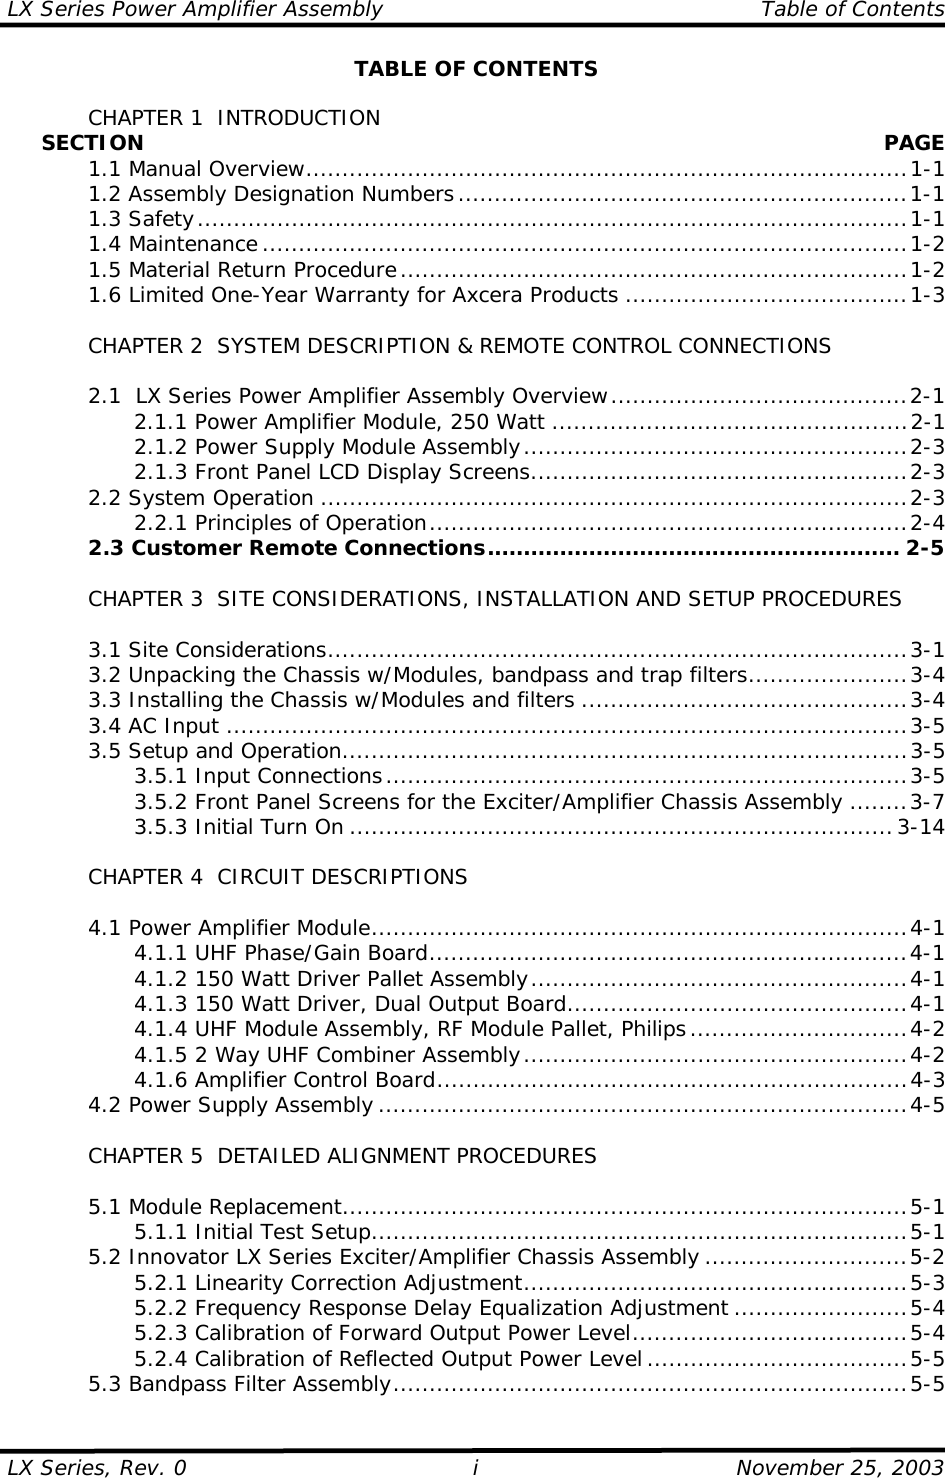 LX Series Power Amplifier Assembly    Table of Contents  LX Series, Rev. 0    November 25, 2003 i TABLE OF CONTENTS    CHAPTER 1  INTRODUCTION      SECTION   PAGE  1.1 Manual Overview...................................................................................1-1   1.2 Assembly Designation Numbers..............................................................1-1  1.3 Safety..................................................................................................1-1  1.4 Maintenance .........................................................................................1-2   1.5 Material Return Procedure......................................................................1-2   1.6 Limited One-Year Warranty for Axcera Products .......................................1-3    CHAPTER 2  SYSTEM DESCRIPTION &amp; REMOTE CONTROL CONNECTIONS    2.1  LX Series Power Amplifier Assembly Overview.........................................2-1     2.1.1 Power Amplifier Module, 250 Watt .................................................2-1     2.1.2 Power Supply Module Assembly.....................................................2-3     2.1.3 Front Panel LCD Display Screens....................................................2-3  2.2 System Operation .................................................................................2-3     2.2.1 Principles of Operation..................................................................2-4   2.3 Customer Remote Connections......................................................... 2-5      CHAPTER 3  SITE CONSIDERATIONS, INSTALLATION AND SETUP PROCEDURES     3.1 Site Considerations................................................................................3-1   3.2 Unpacking the Chassis w/Modules, bandpass and trap filters......................3-4   3.3 Installing the Chassis w/Modules and filters .............................................3-4  3.4 AC Input ..............................................................................................3-5   3.5 Setup and Operation..............................................................................3-5     3.5.1 Input Connections........................................................................3-5     3.5.2 Front Panel Screens for the Exciter/Amplifier Chassis Assembly ........3-7     3.5.3 Initial Turn On ...........................................................................3-14    CHAPTER 4  CIRCUIT DESCRIPTIONS    4.1 Power Amplifier Module..........................................................................4-1     4.1.1 UHF Phase/Gain Board..................................................................4-1     4.1.2 150 Watt Driver Pallet Assembly....................................................4-1     4.1.3 150 Watt Driver, Dual Output Board...............................................4-1     4.1.4 UHF Module Assembly, RF Module Pallet, Philips..............................4-2     4.1.5 2 Way UHF Combiner Assembly.....................................................4-2     4.1.6 Amplifier Control Board.................................................................4-3   4.2 Power Supply Assembly .........................................................................4-5    CHAPTER 5  DETAILED ALIGNMENT PROCEDURES   5.1 Module Replacement..............................................................................5-1     5.1.1 Initial Test Setup..........................................................................5-1   5.2 Innovator LX Series Exciter/Amplifier Chassis Assembly ............................5-2     5.2.1 Linearity Correction Adjustment.....................................................5-3     5.2.2 Frequency Response Delay Equalization Adjustment ........................5-4     5.2.3 Calibration of Forward Output Power Level......................................5-4     5.2.4 Calibration of Reflected Output Power Level....................................5-5   5.3 Bandpass Filter Assembly.......................................................................5-5 